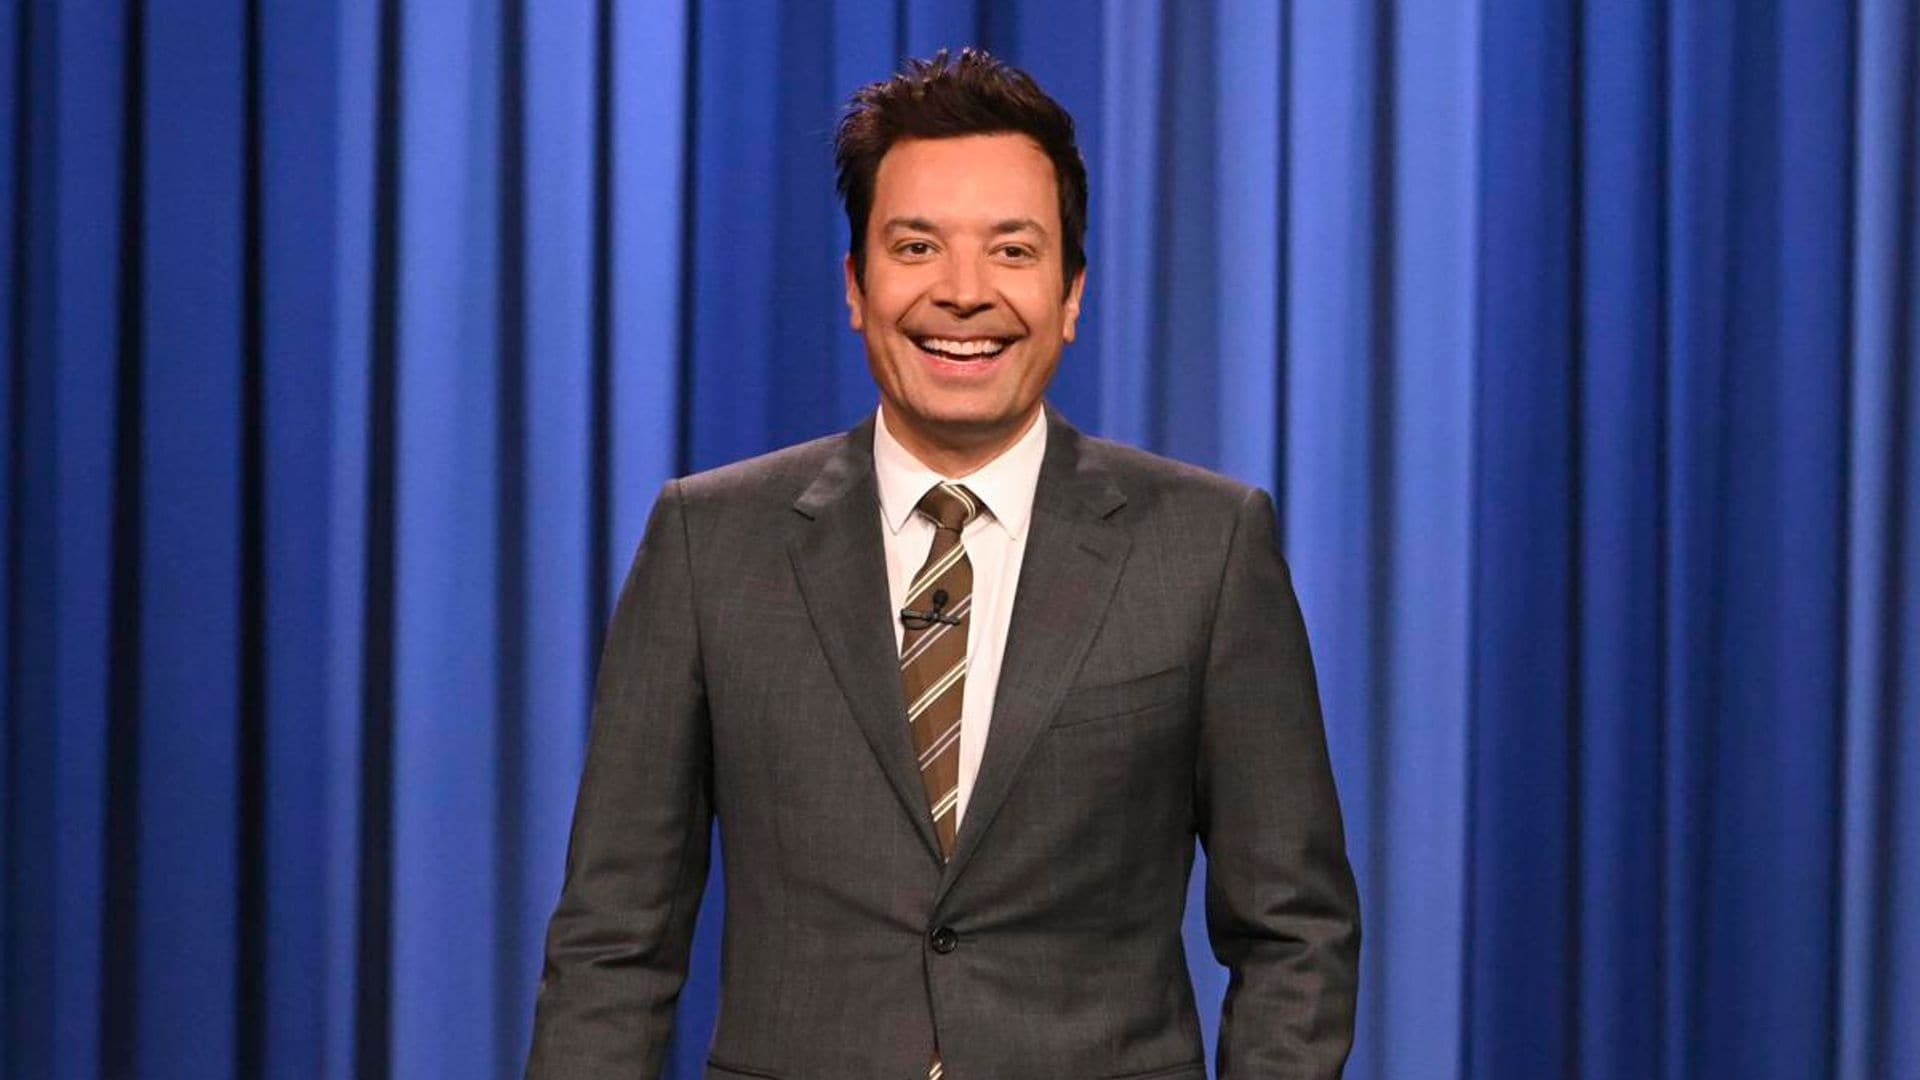 Jimmy Fallon extends tenure at ‘The Tonight Show’ through 2028